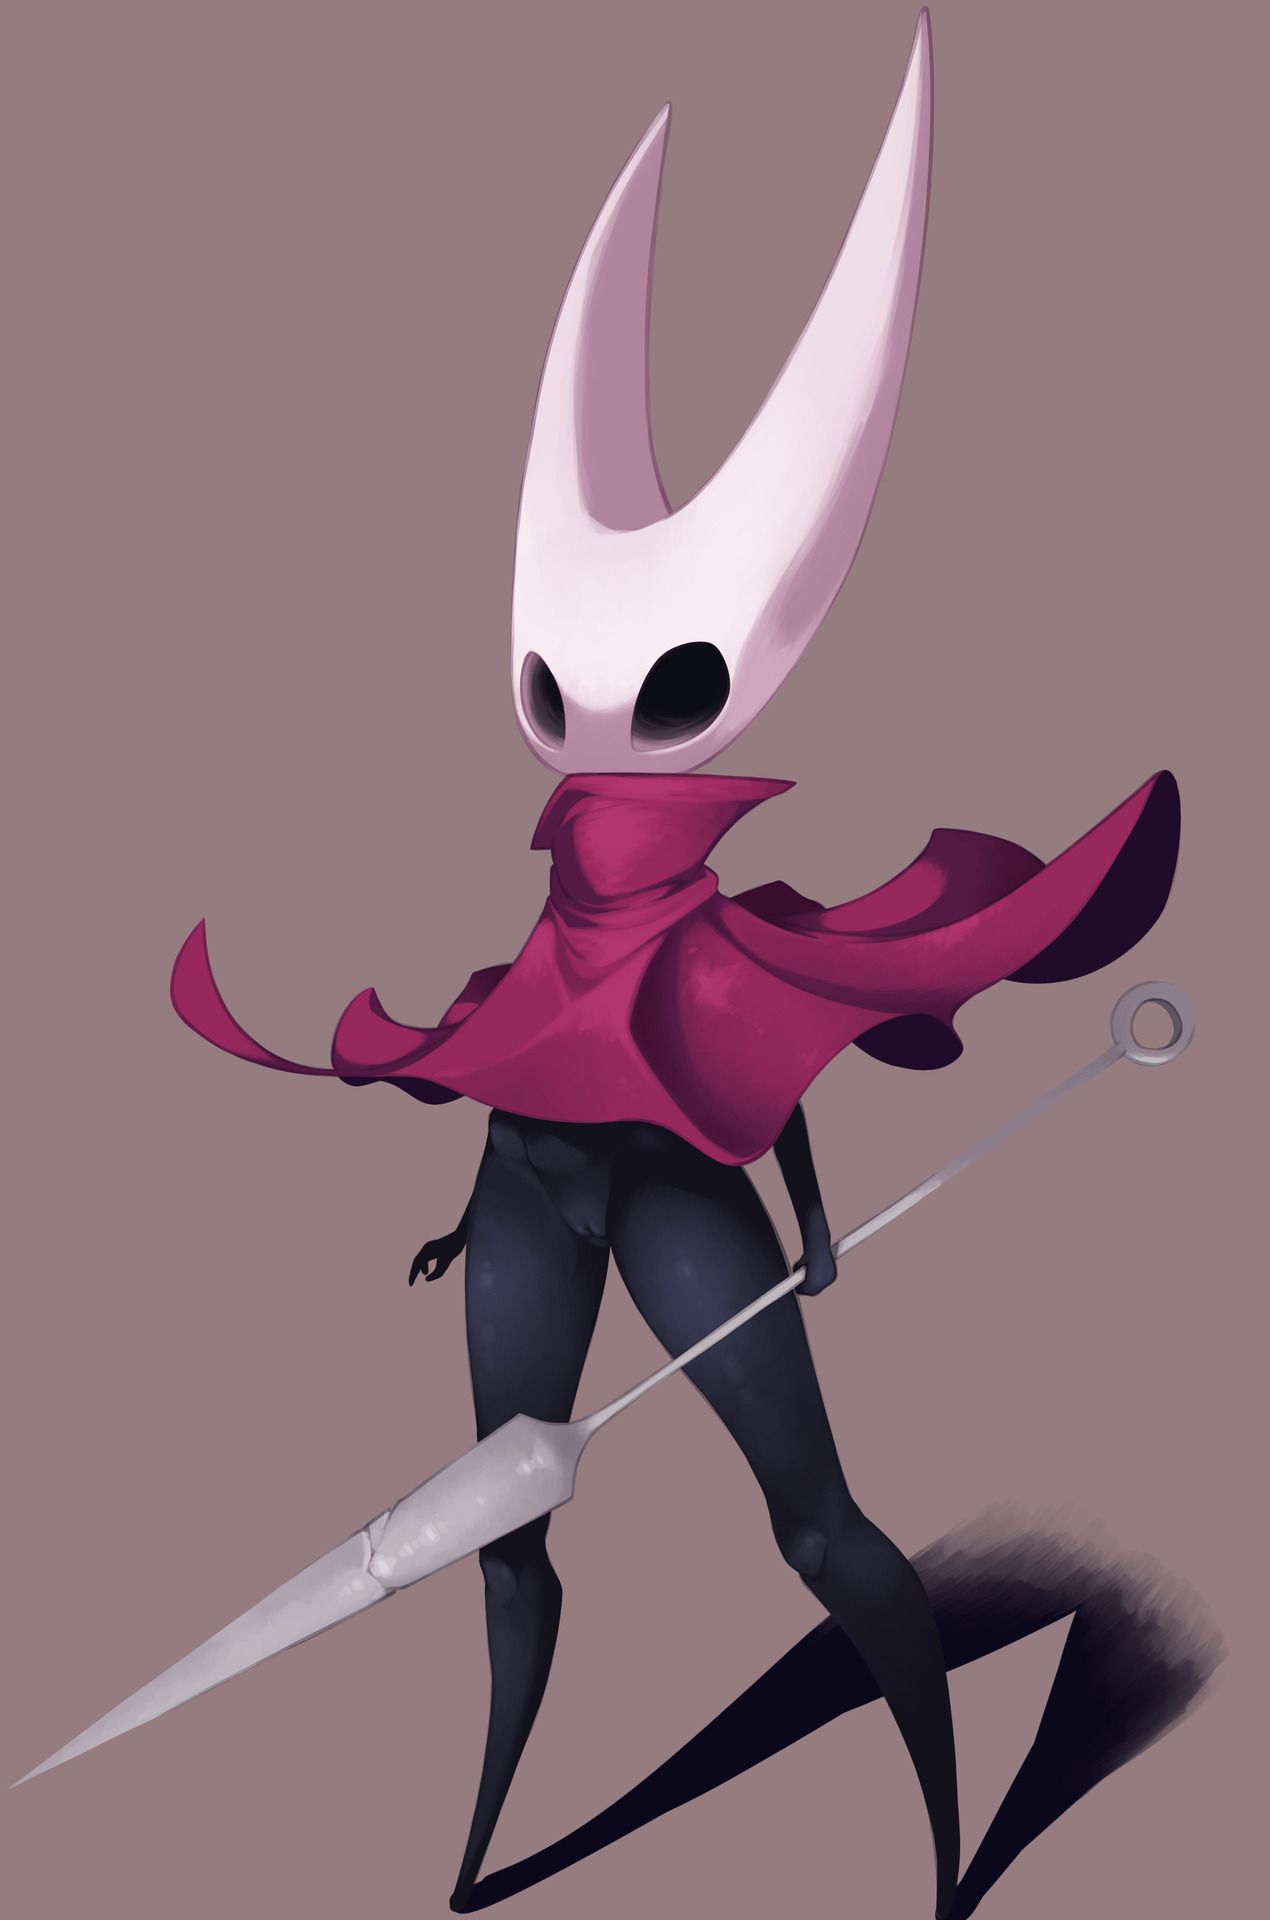 Hollow knight collection 2